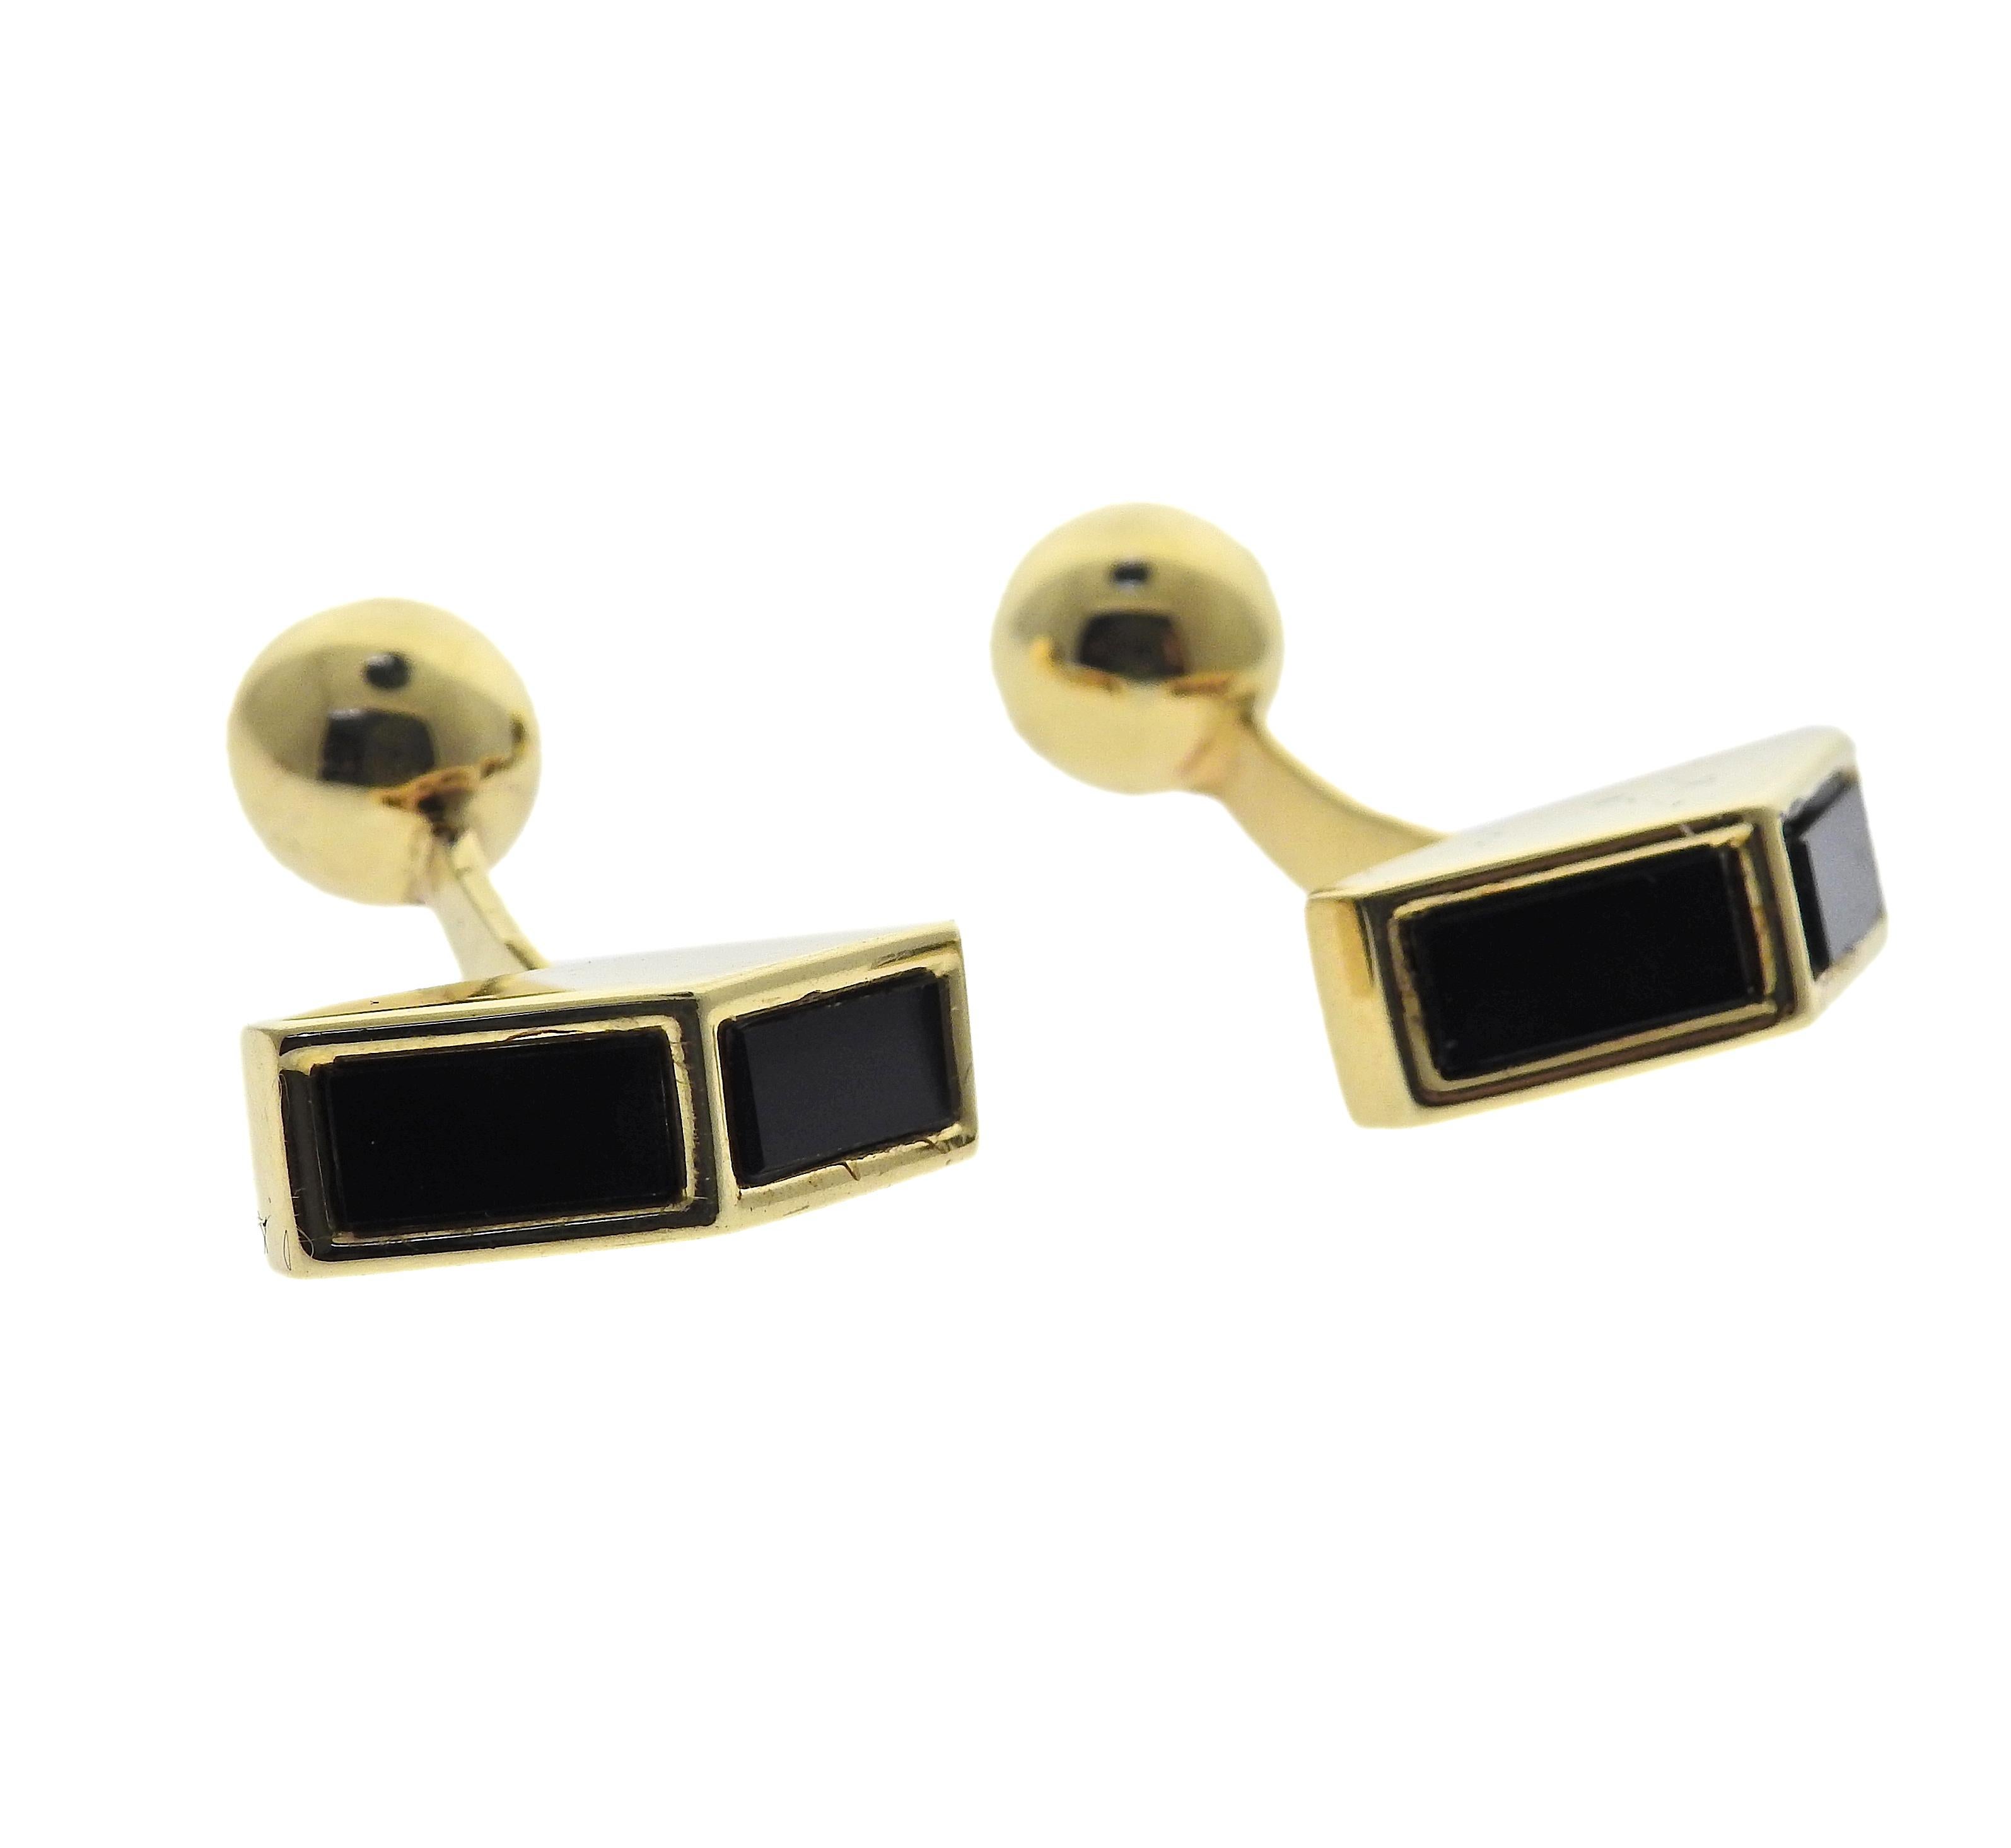 Vintage set of studs and cufflinks made by Tiffany & Co in 18K yellow gold and anyx. Cufflink top measures 19mm x 6mm, back is 8mm in diameter. Stud measures 12.0mm x 7.0mm. Marked: Tiffany & Co, 18k. Weight is 32.0 grams. One cufflink has a light